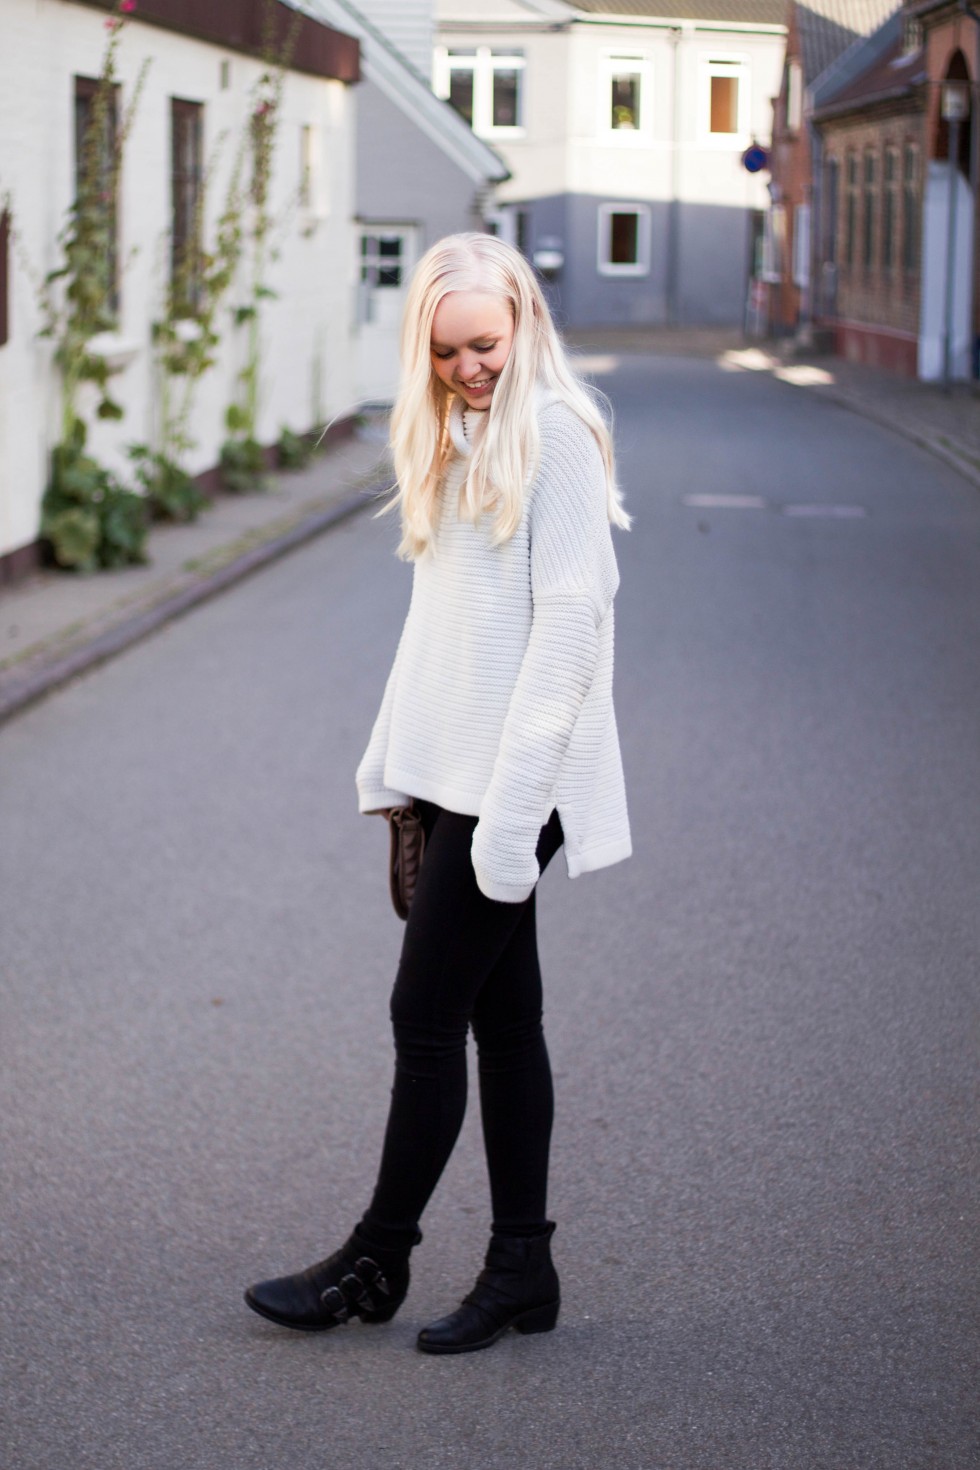 Outfit of the day - white knit, black skinny jeans and black boots.